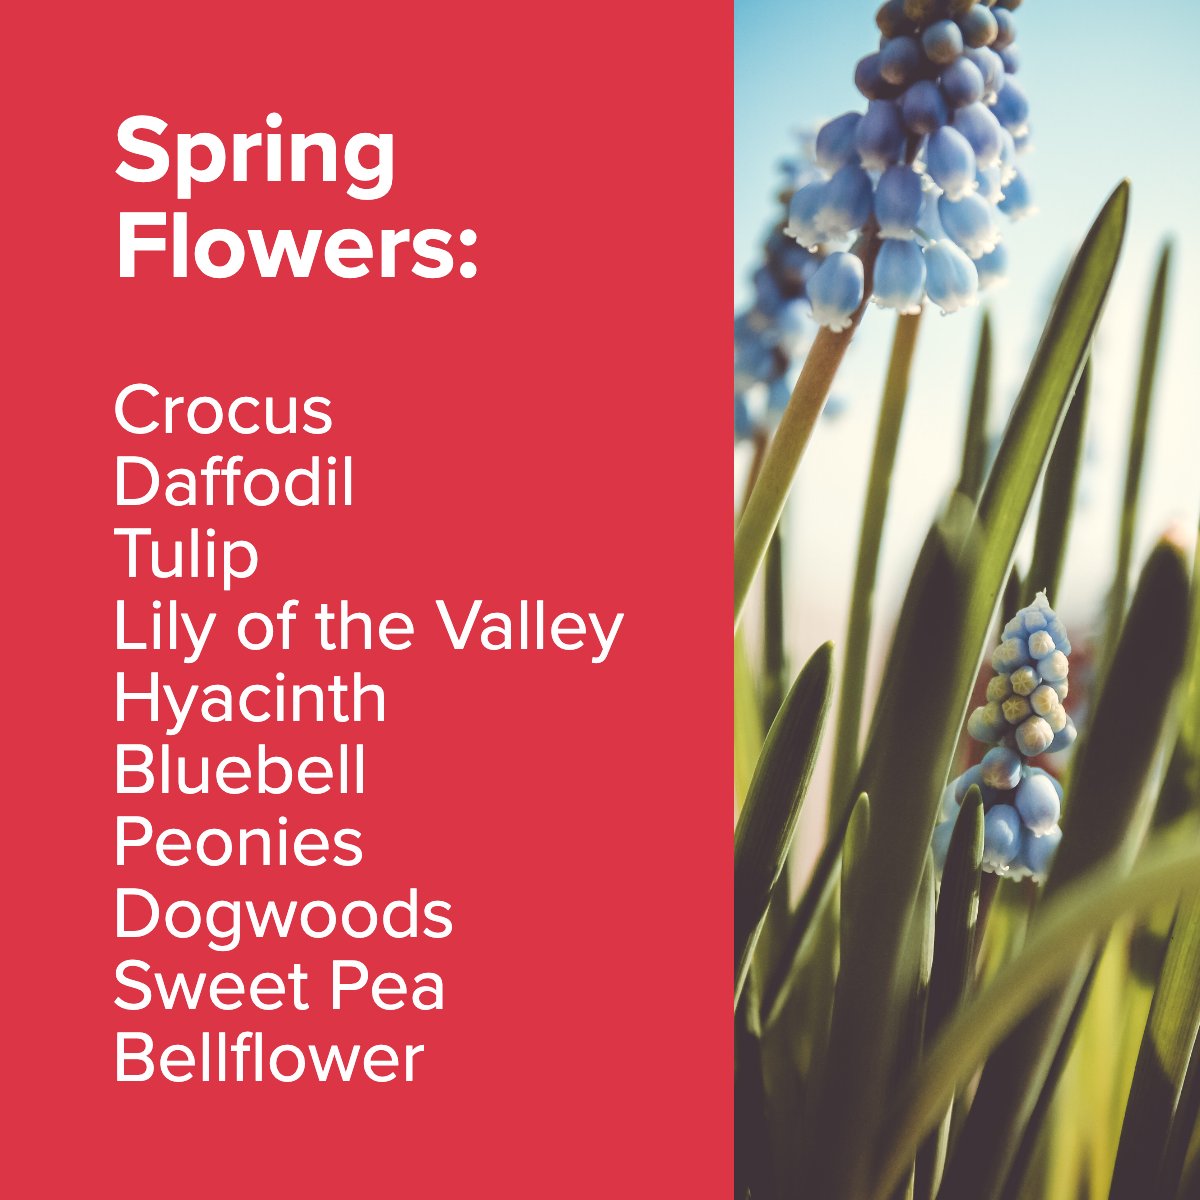 When spring arrives, why not welcome it with a garden full of blossoms to chase the winter blues away? 🌼🌺

#springflowers🌸      #flowersspringtime      #lovespringflowers      #springflowersblooming
#Realestate #fairlawn #paramus #saddlebrook #njrealestate